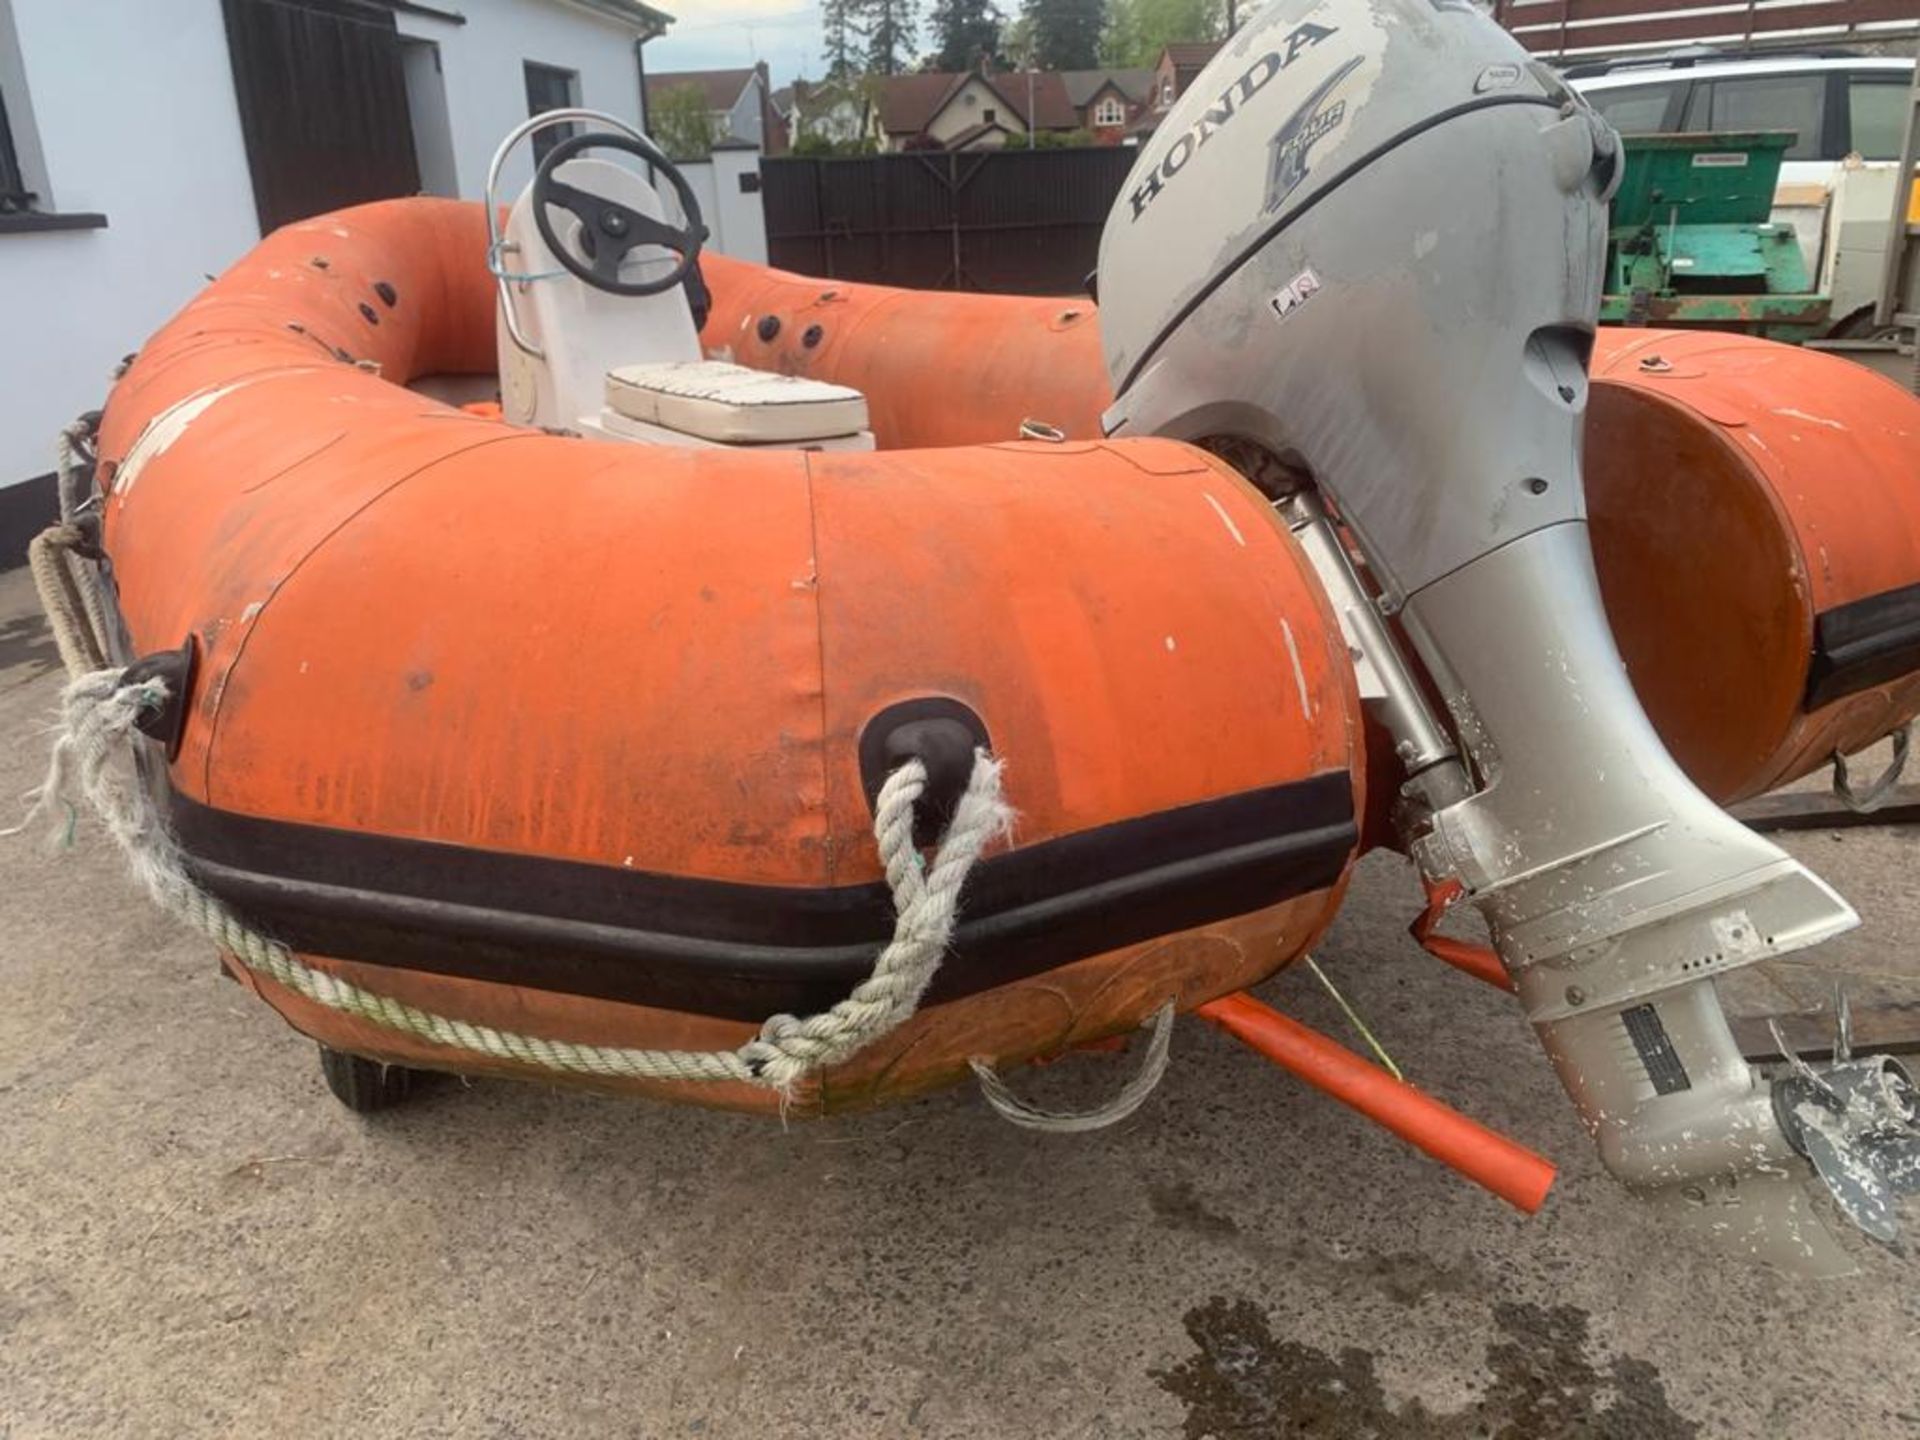 DUNLOP FAST RESCUE 14 FEET RIBBED BOAT HONDA 20HP ENGINE LOCATION N IRELAND - Image 5 of 8